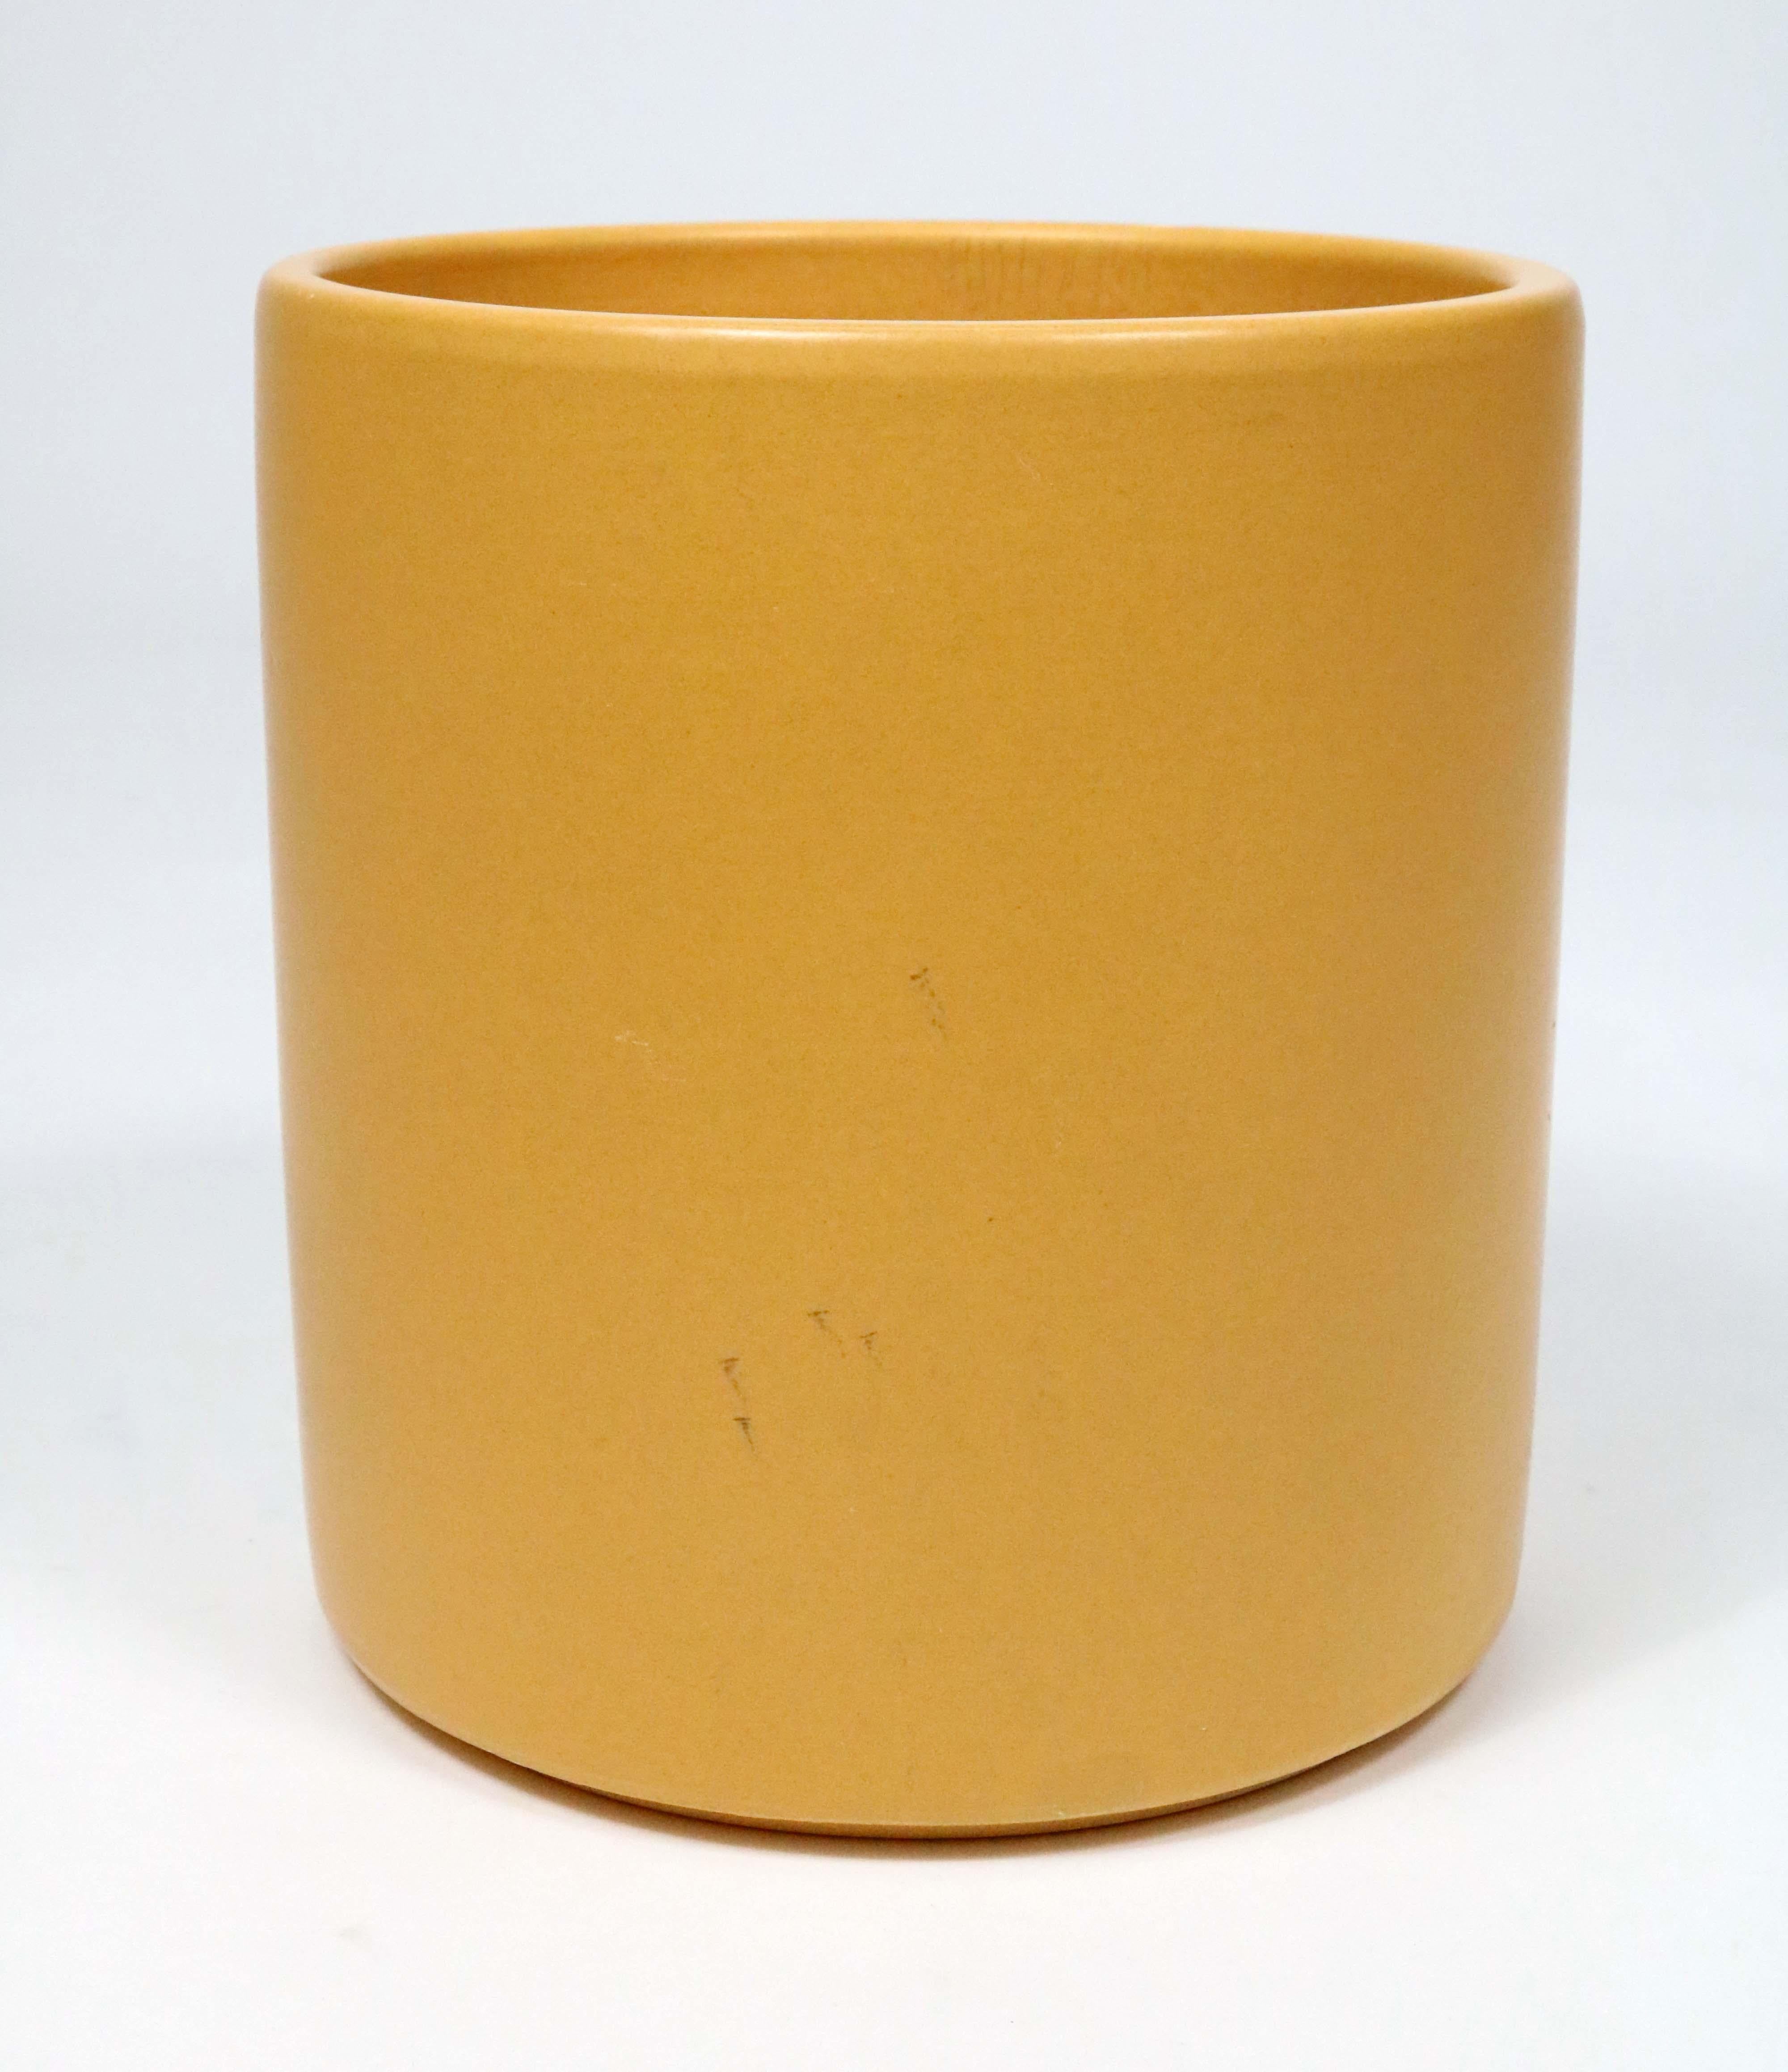 Pair of Midcentury Yellow Ochre Pots by Gainey Pottery 1